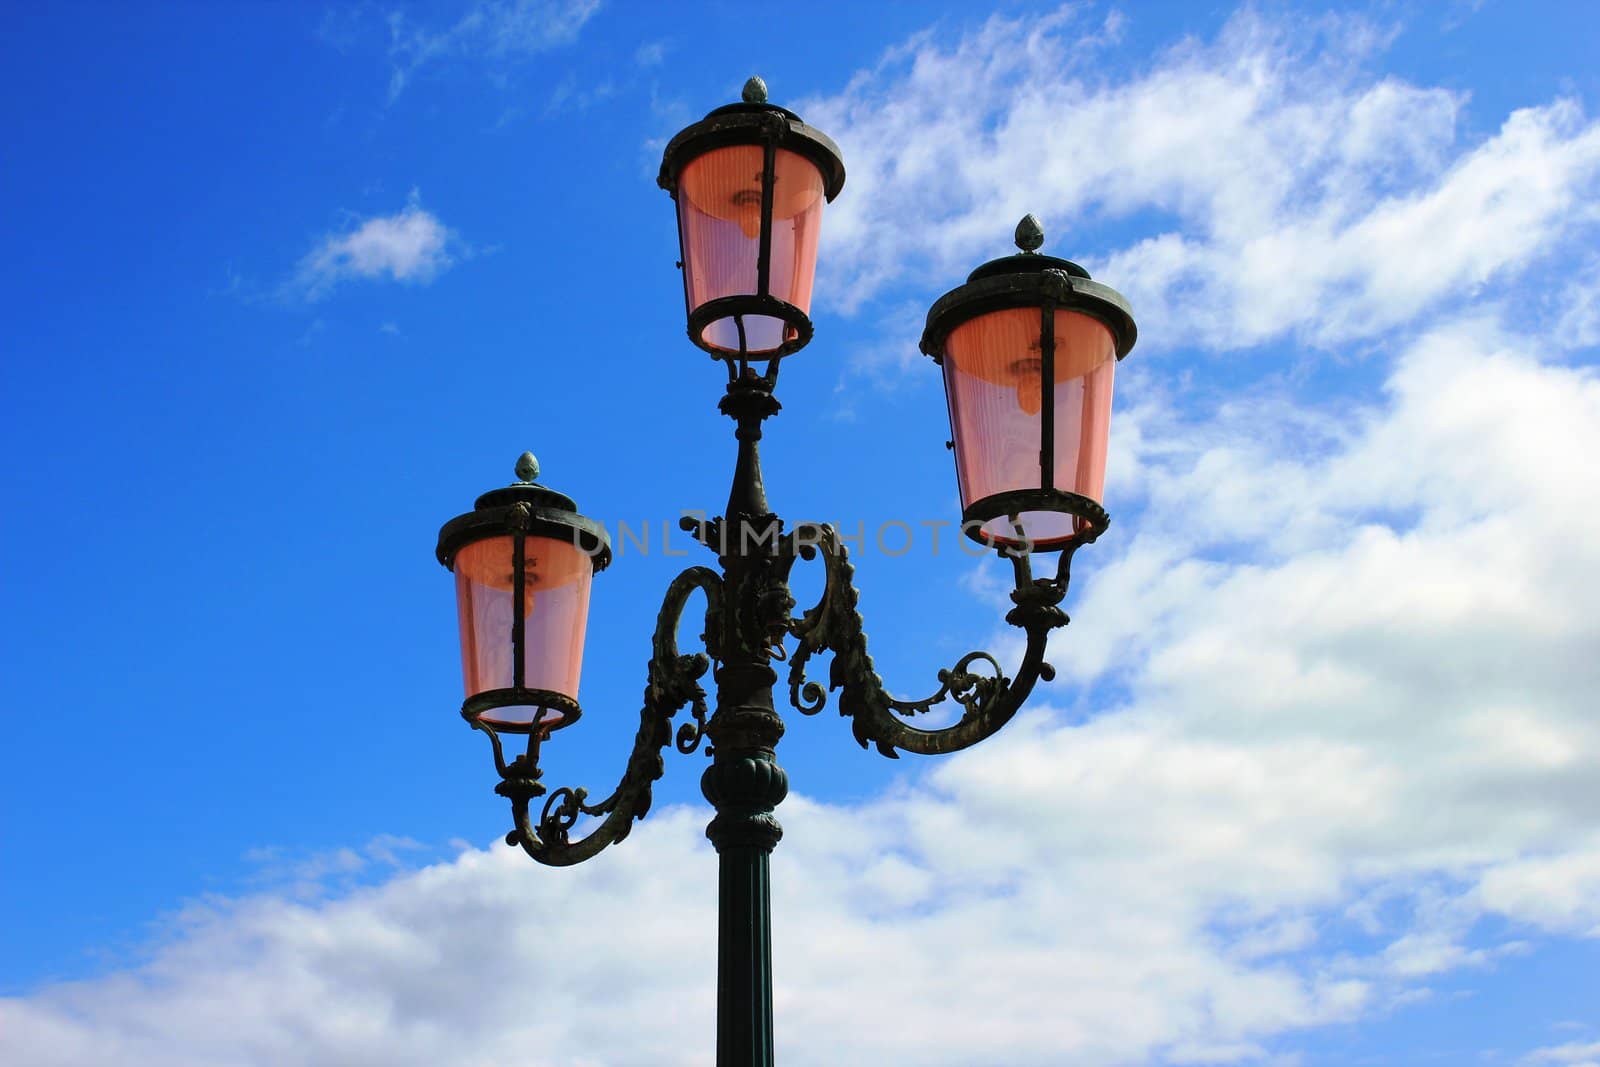 lantern in Venice in a day. Backgroud is beautifull blue sky with white clouds